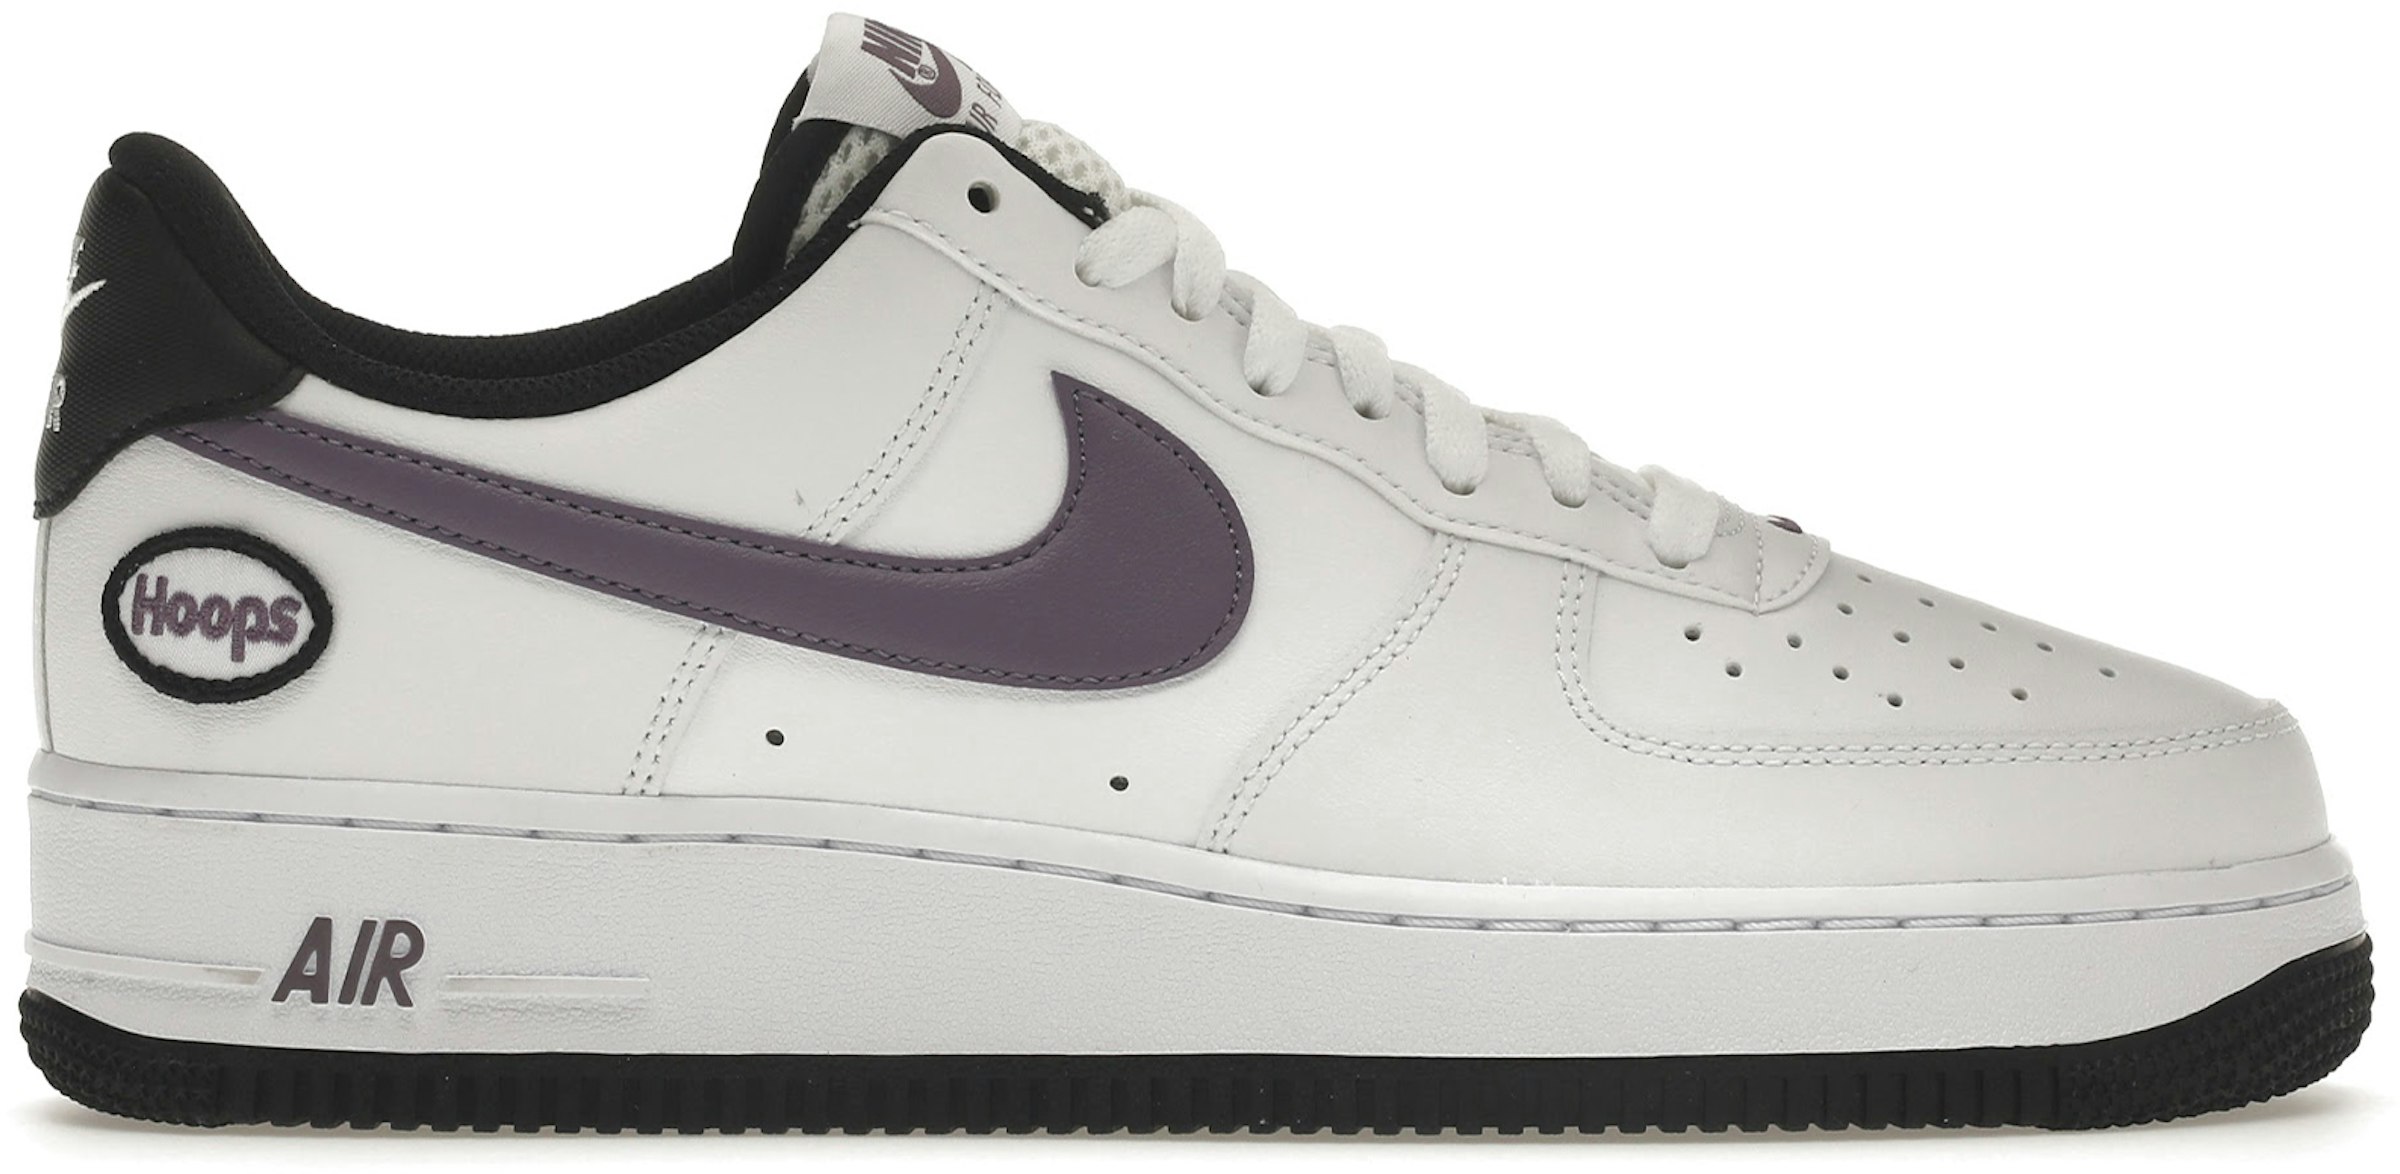 hud Ingen Forretningsmand Nike Air Force 1 Low Hoops White Canyon Purple Men's - DH7440-100 - US